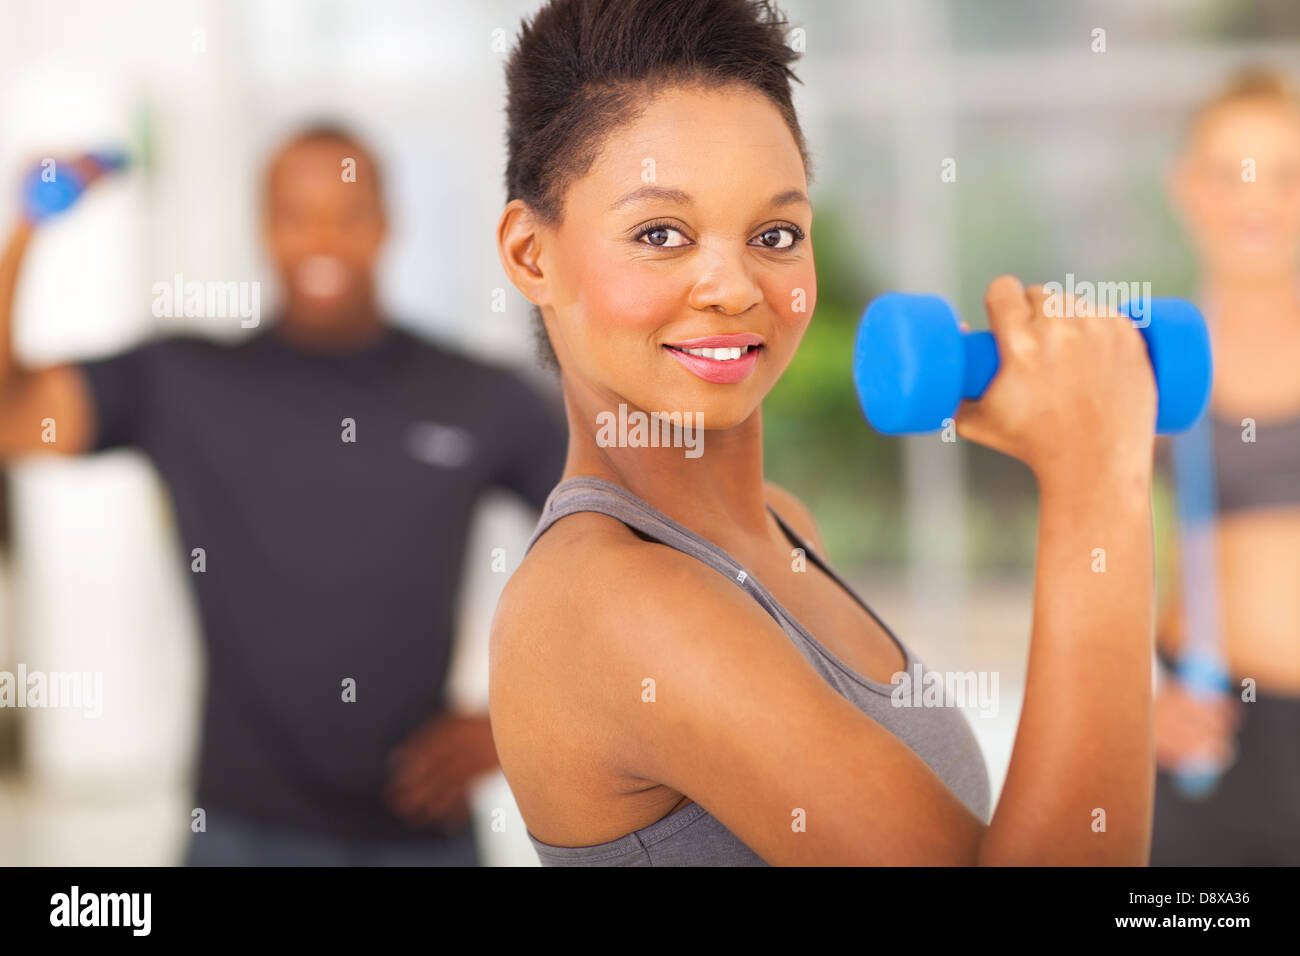 beautiful fit african woman lifting dumbbell Stock Photo